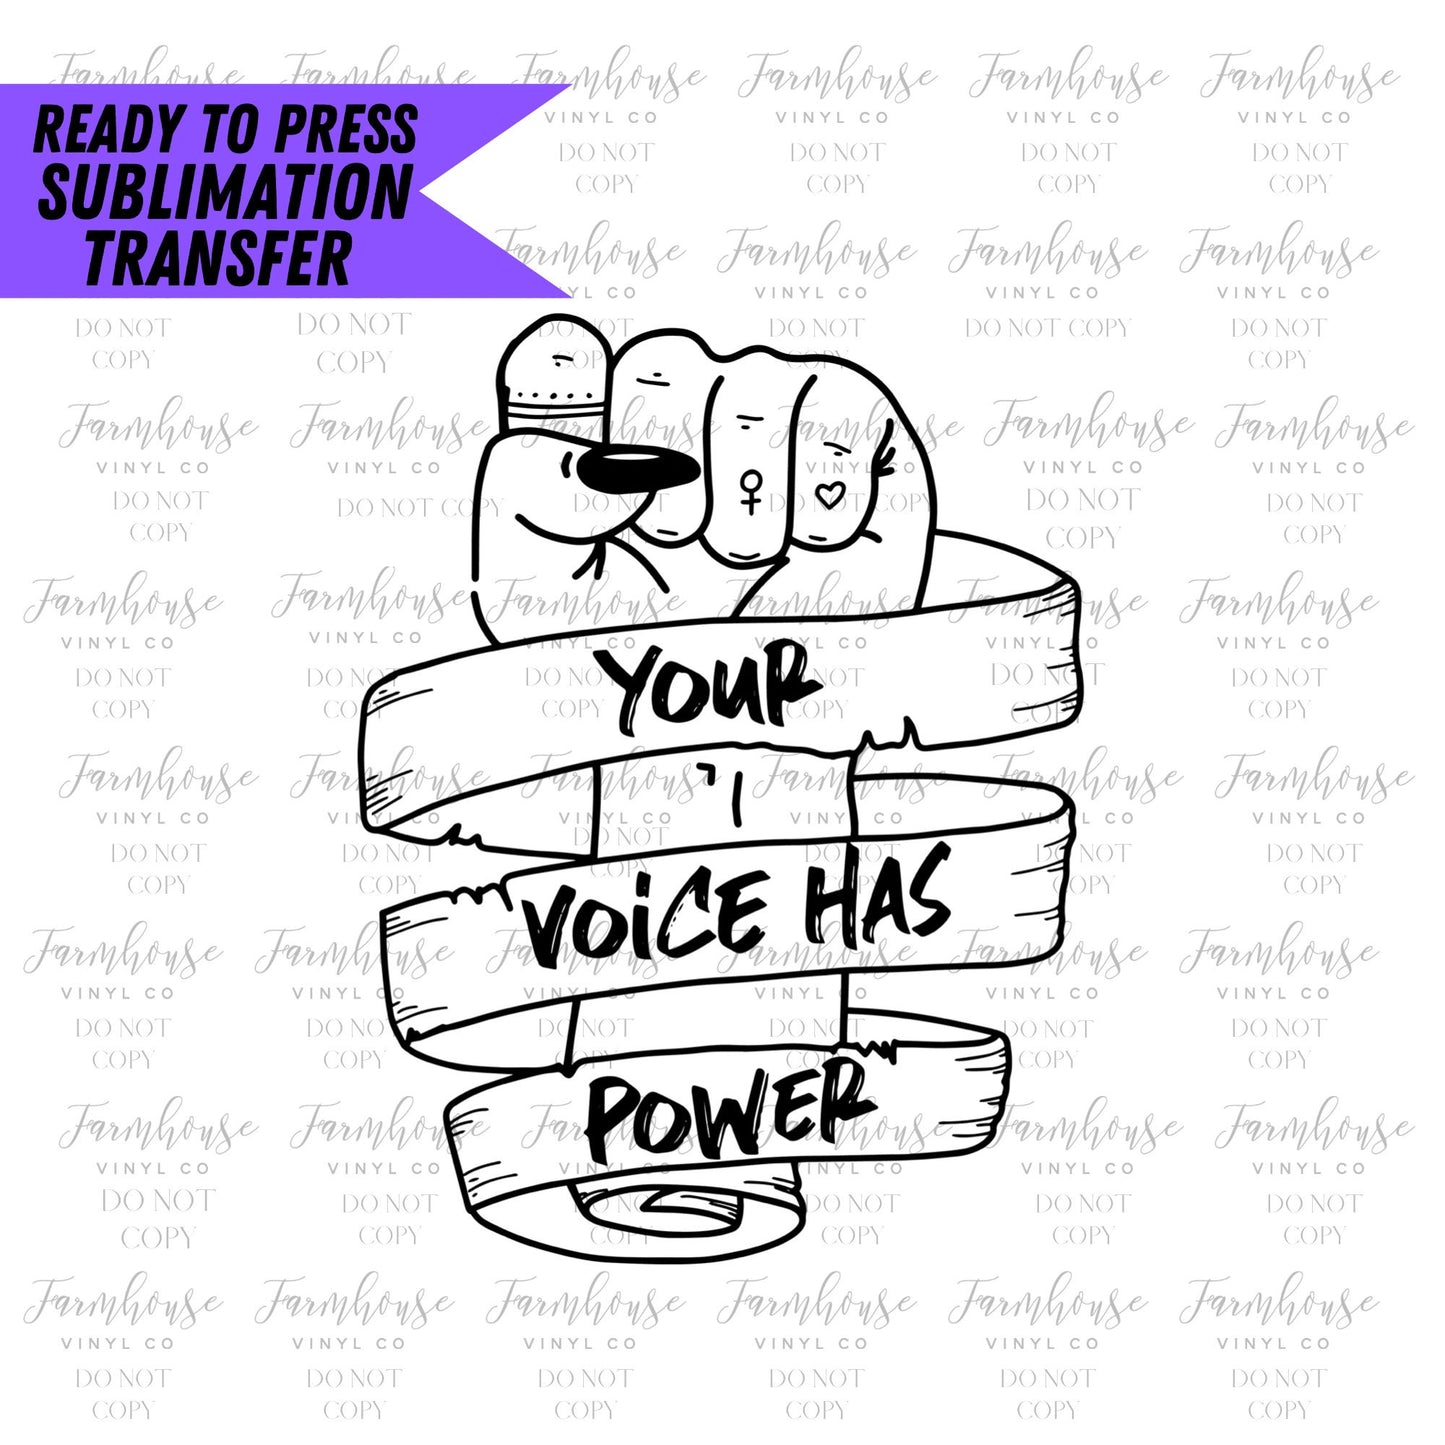 Your Voice Has Power, Ready To Press, Sublimation Transfers, Sublimation Print, Transfer Ready To Press, Clinched Fist Design, March - Farmhouse Vinyl Co